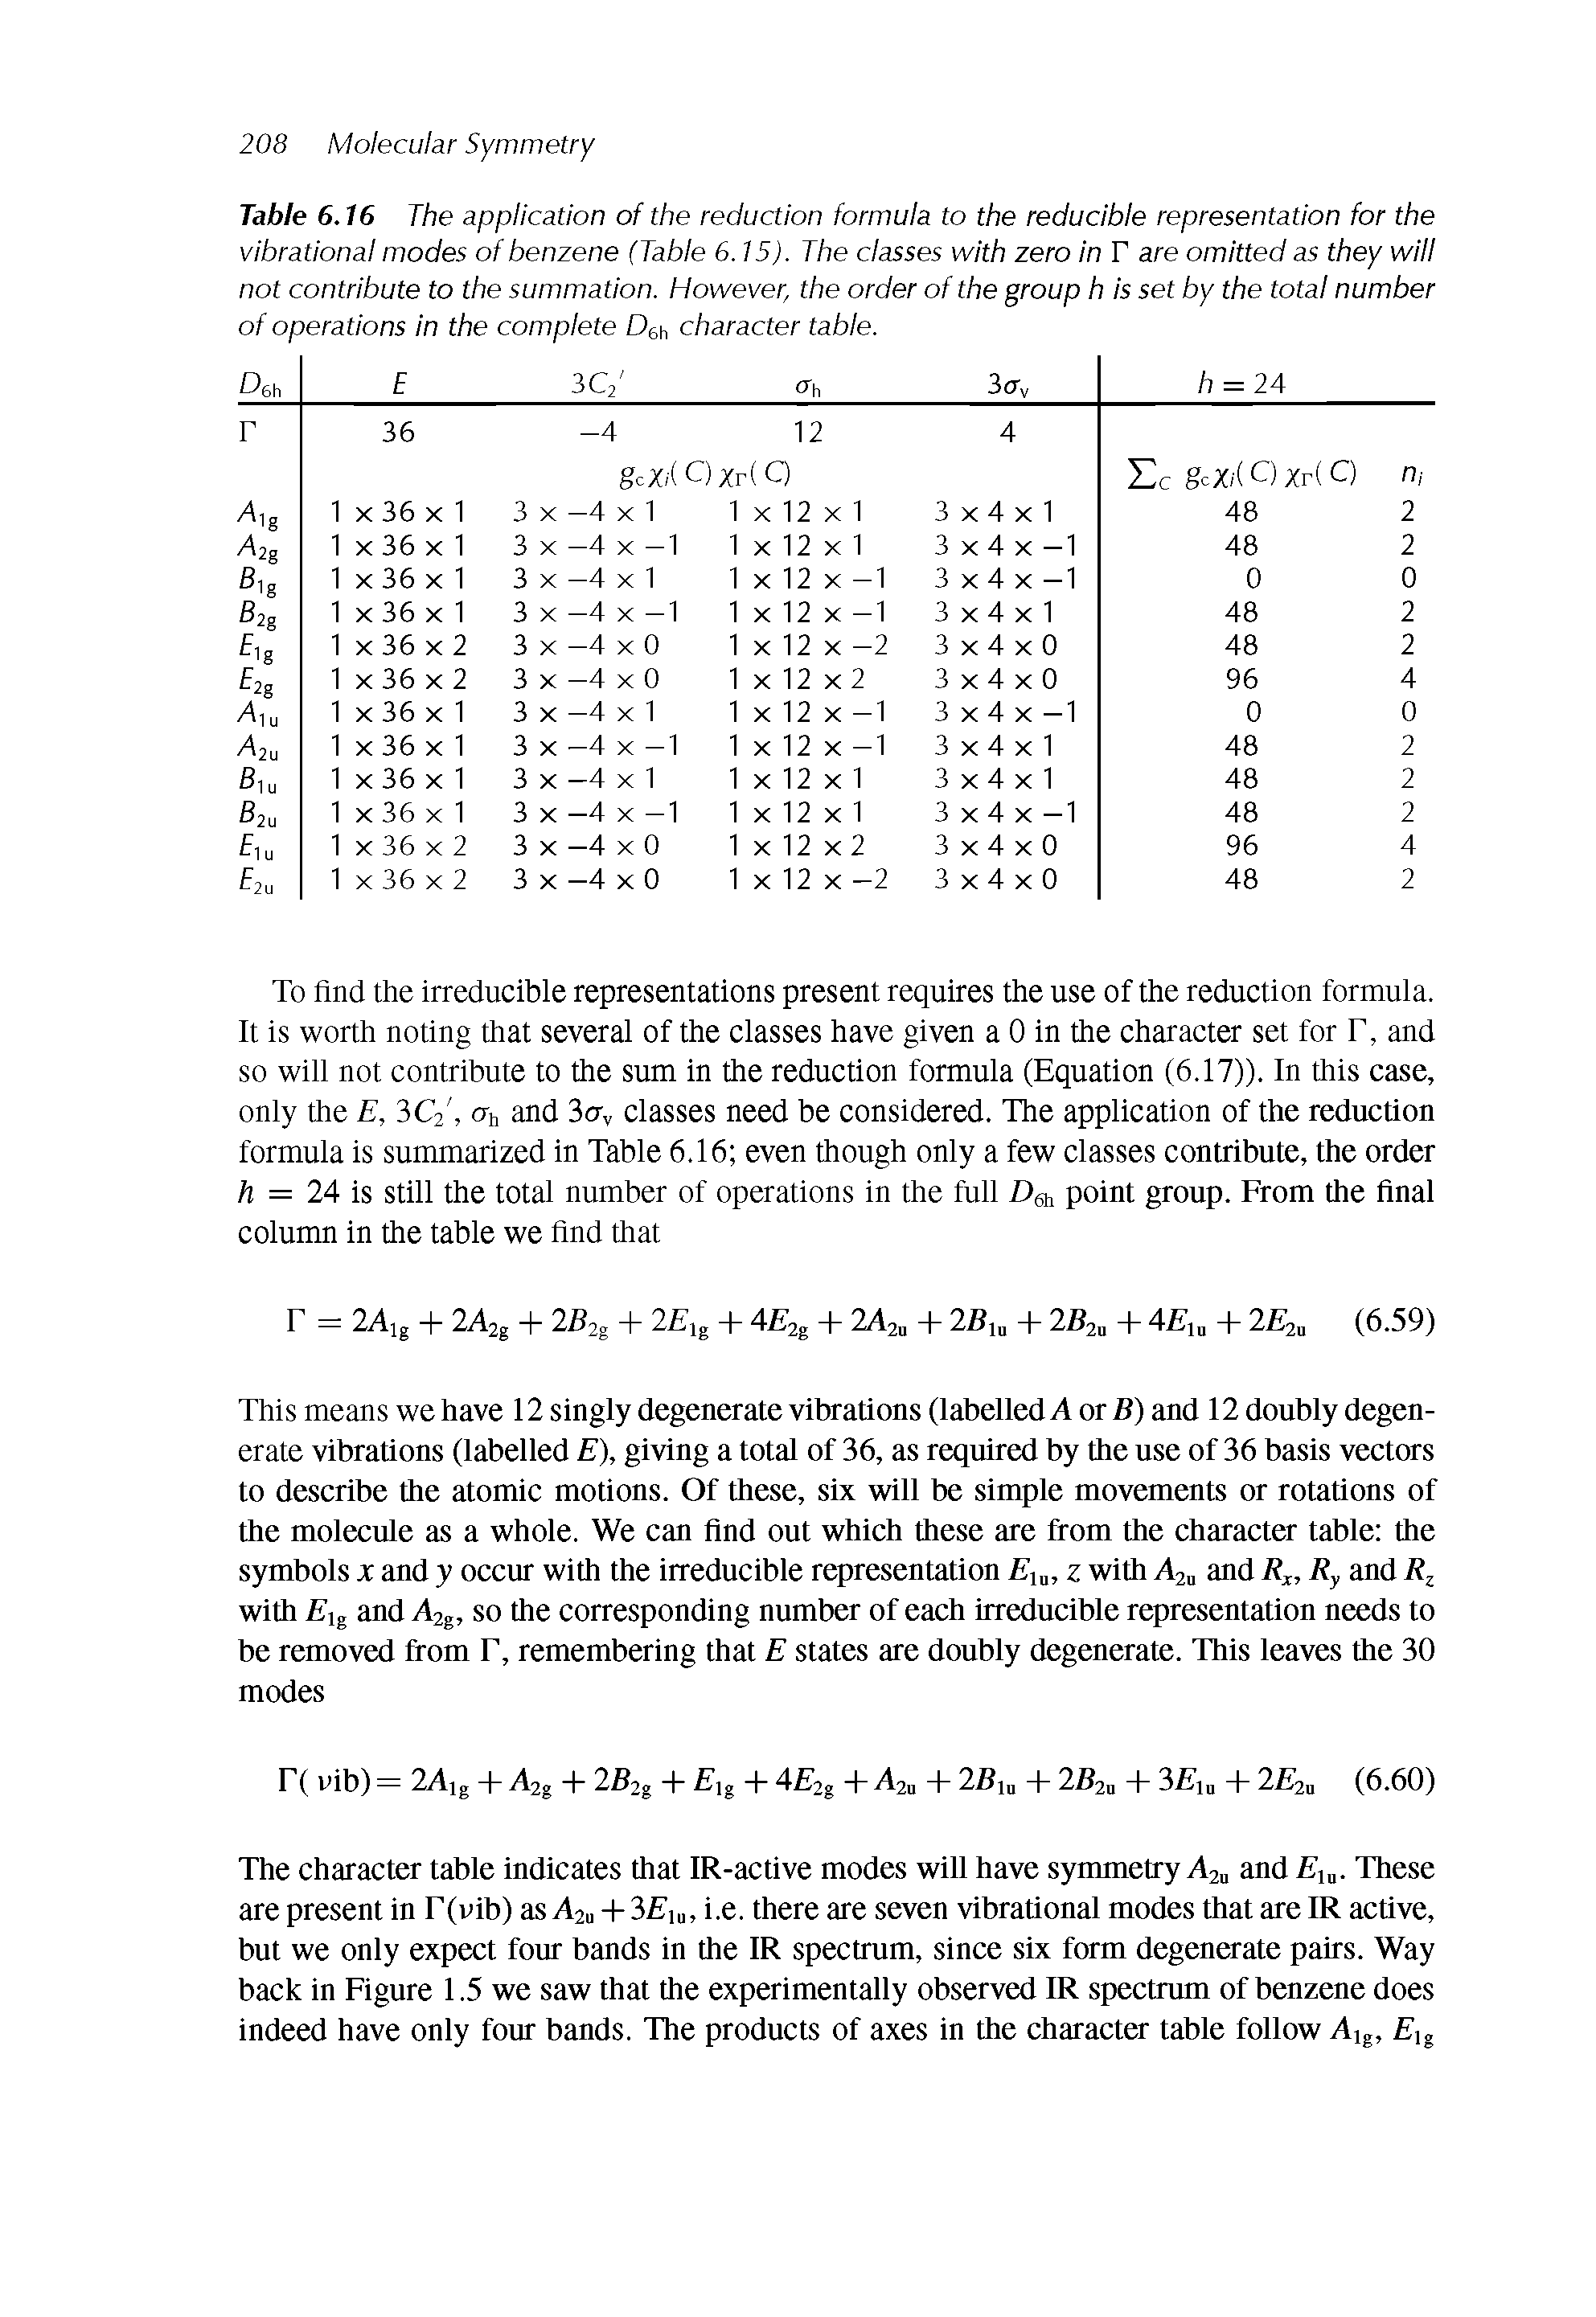 Table 6.16 The application of the reduction formula to the reducible representation for the vibrational modes of benzene (Table 6.15). The classes with zero in P are omitted as they will not contribute to the summation. However, the order of the group h is set by the total number of operations in the complete Deh character table.